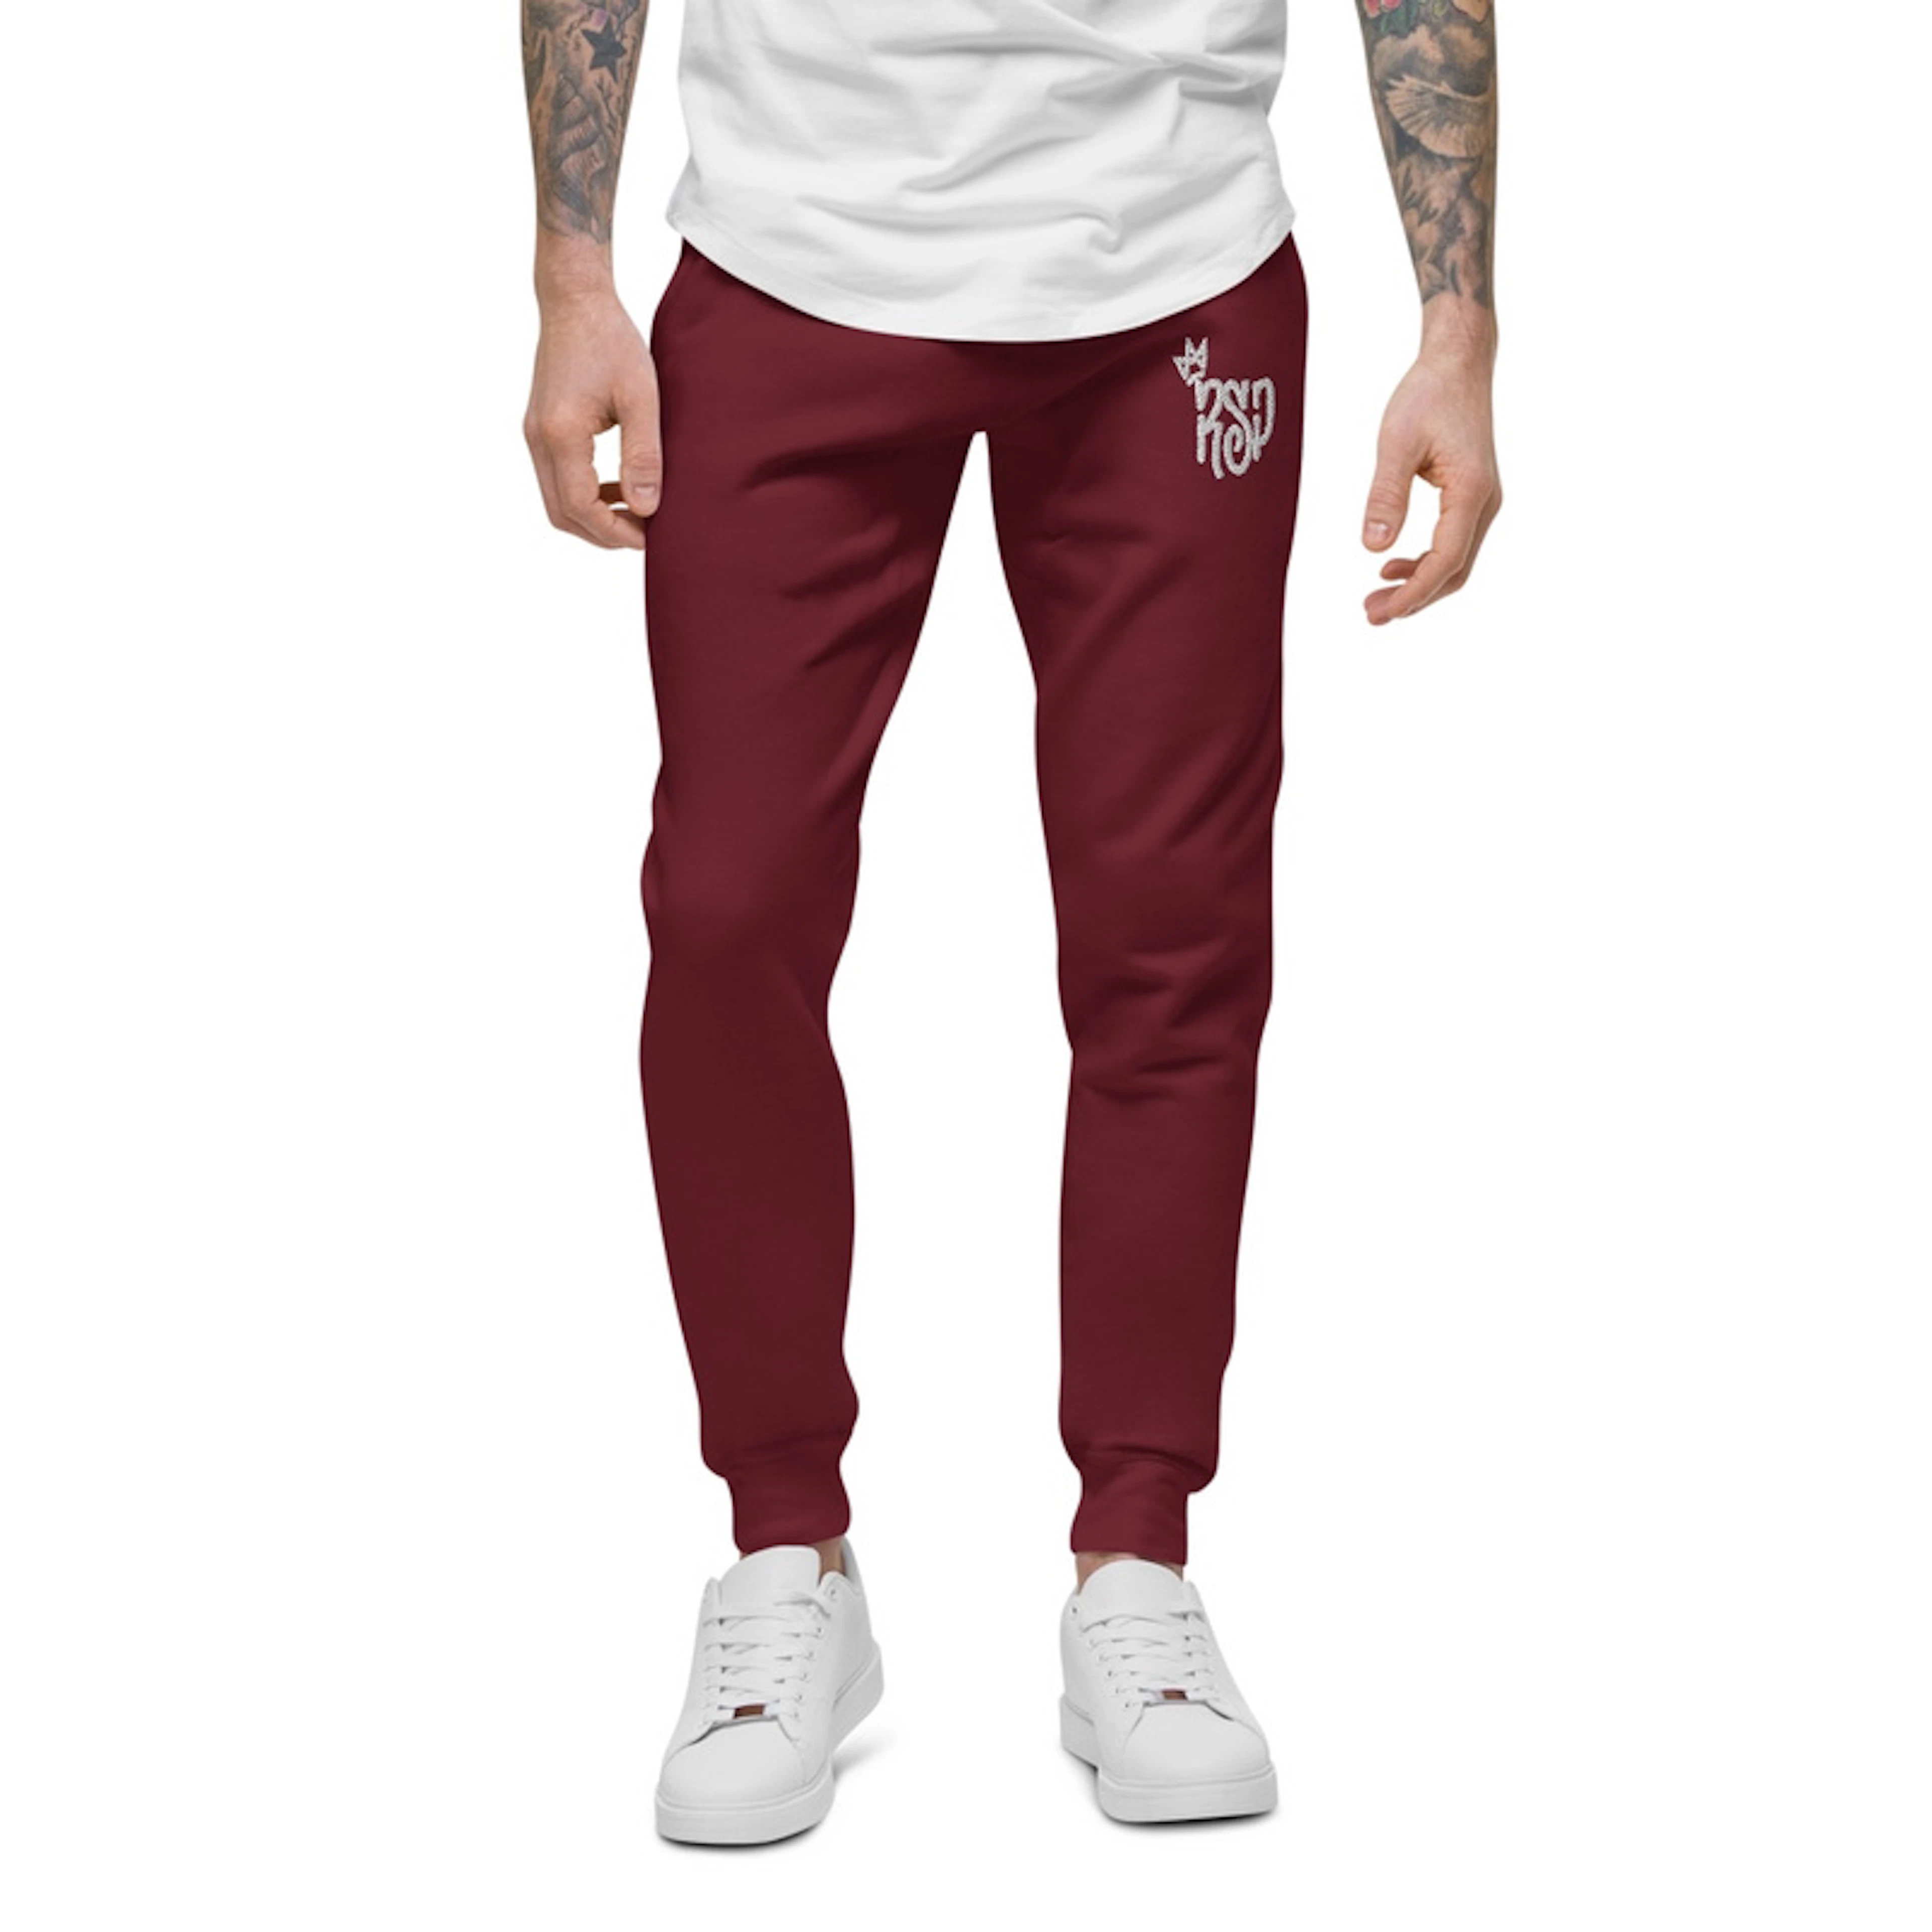 Embroidered RSP Joggers